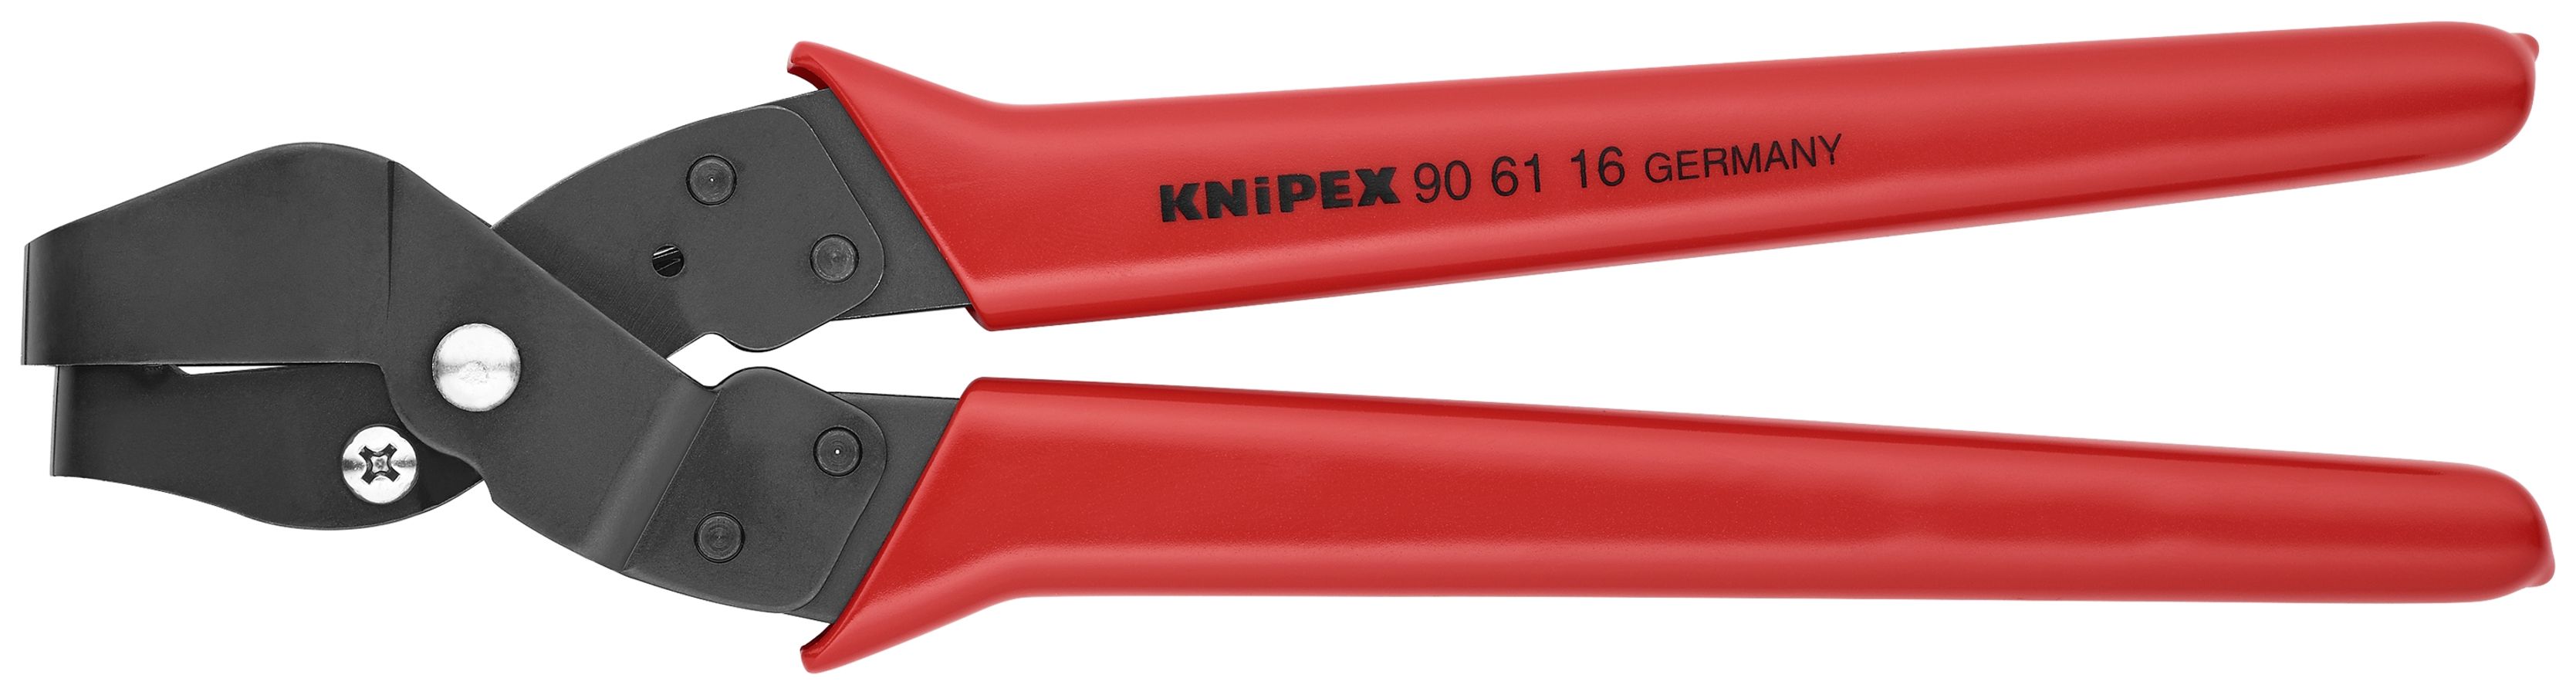 KNIPEX Knipex Notching Pliers Plastic Casings Cable Ducts Opening Spring 250mm 4003773051947 